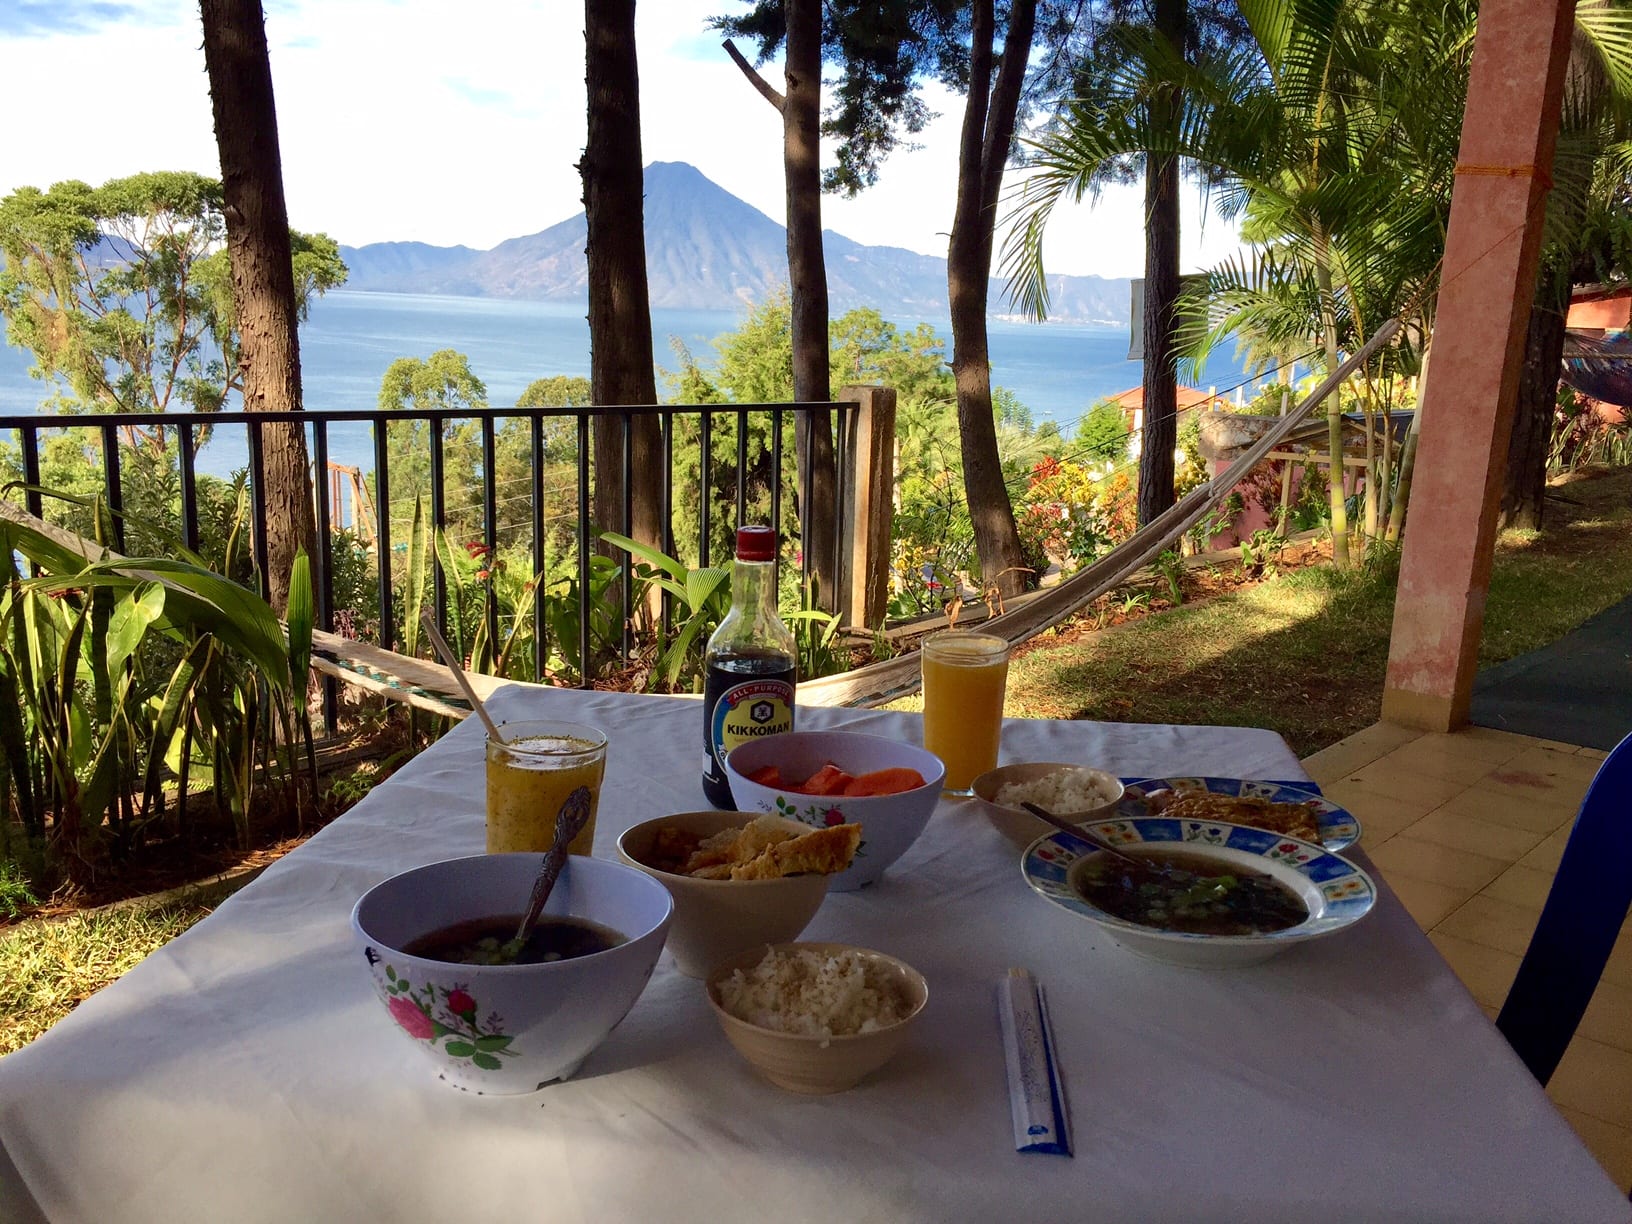 A table set for a Japanese breakfast of miso soup, rise, and fruit, with a hammock in the background and the lake with volcanoes on it beyond that.